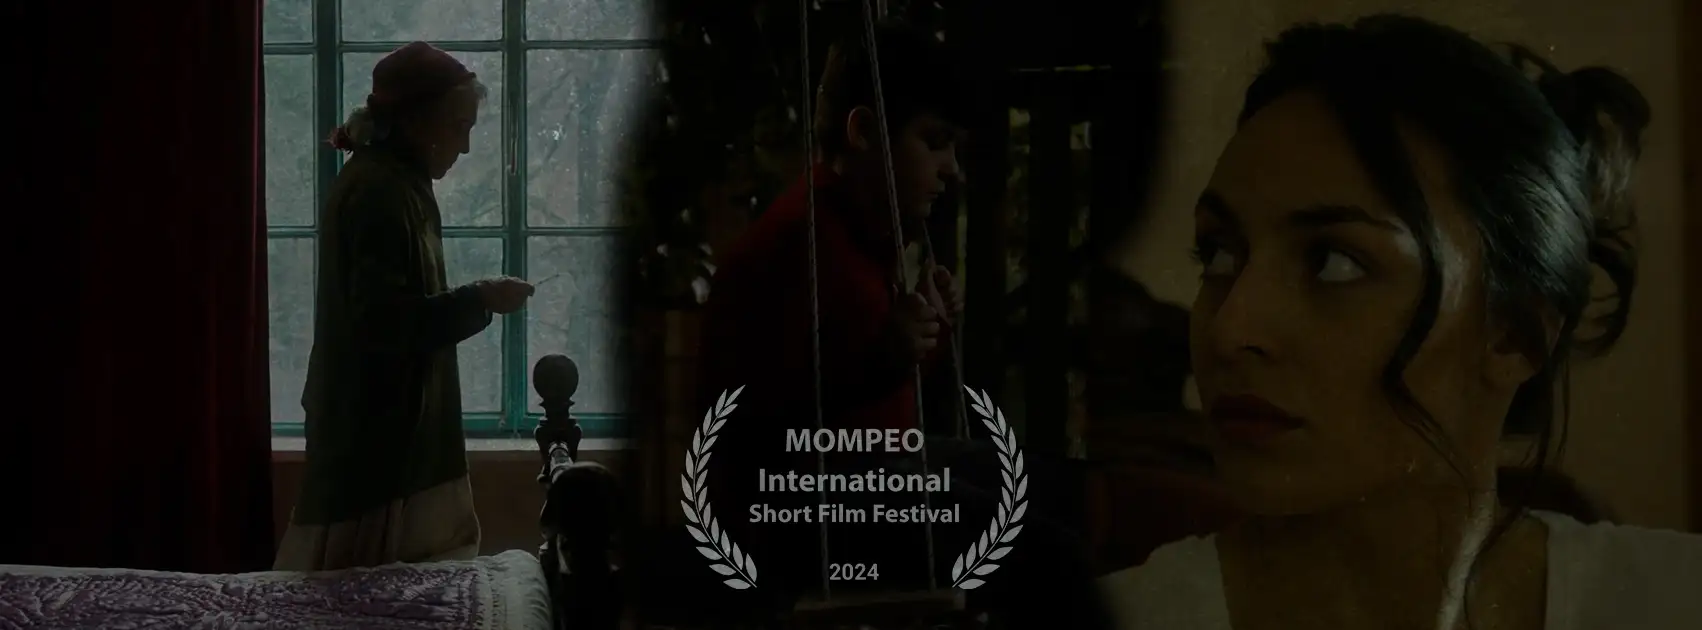 Three Alpha distribution's short films are in competition at Mompeo International Short Film Festival